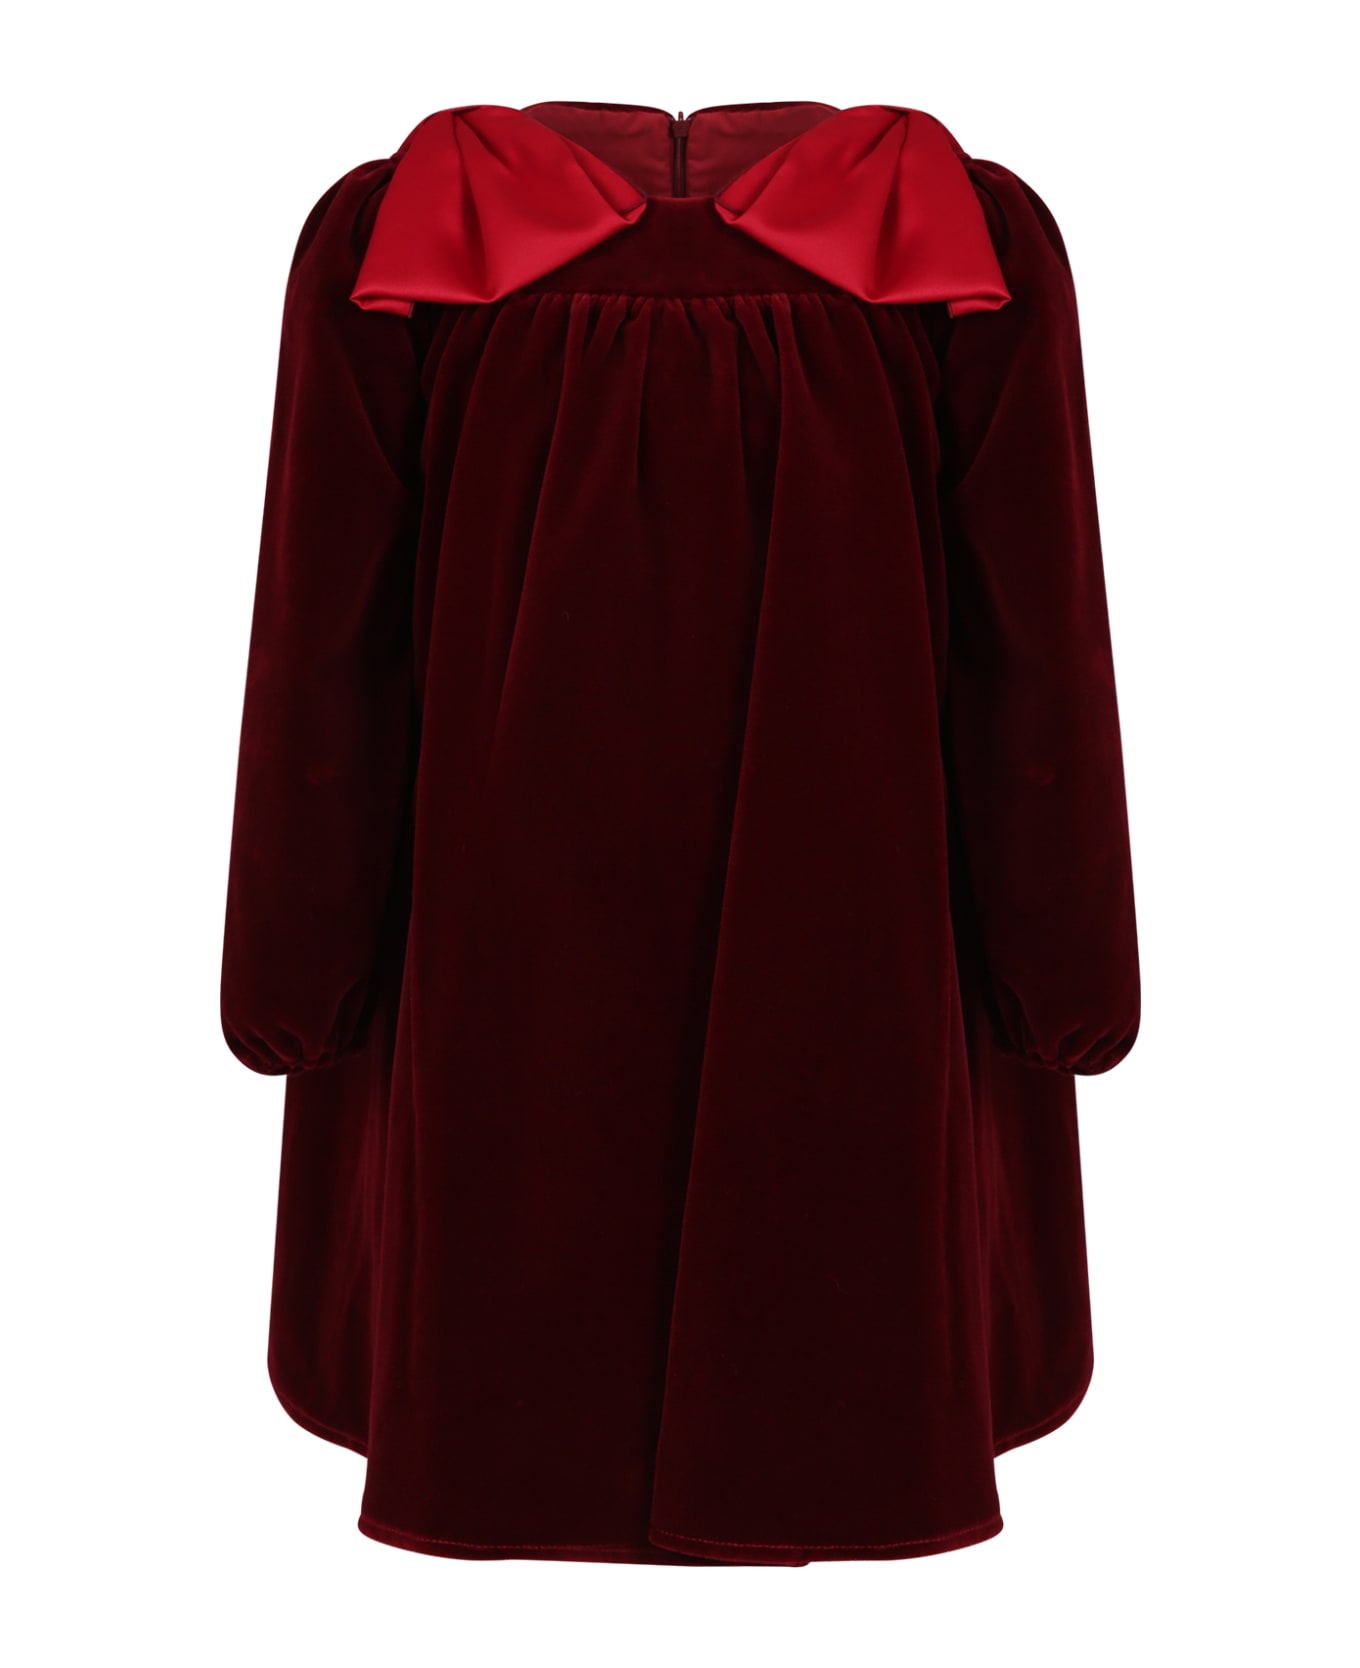 La stupenderia Burgundy Dress For Girl With Bows - Bordeaux ワンピース＆ドレス